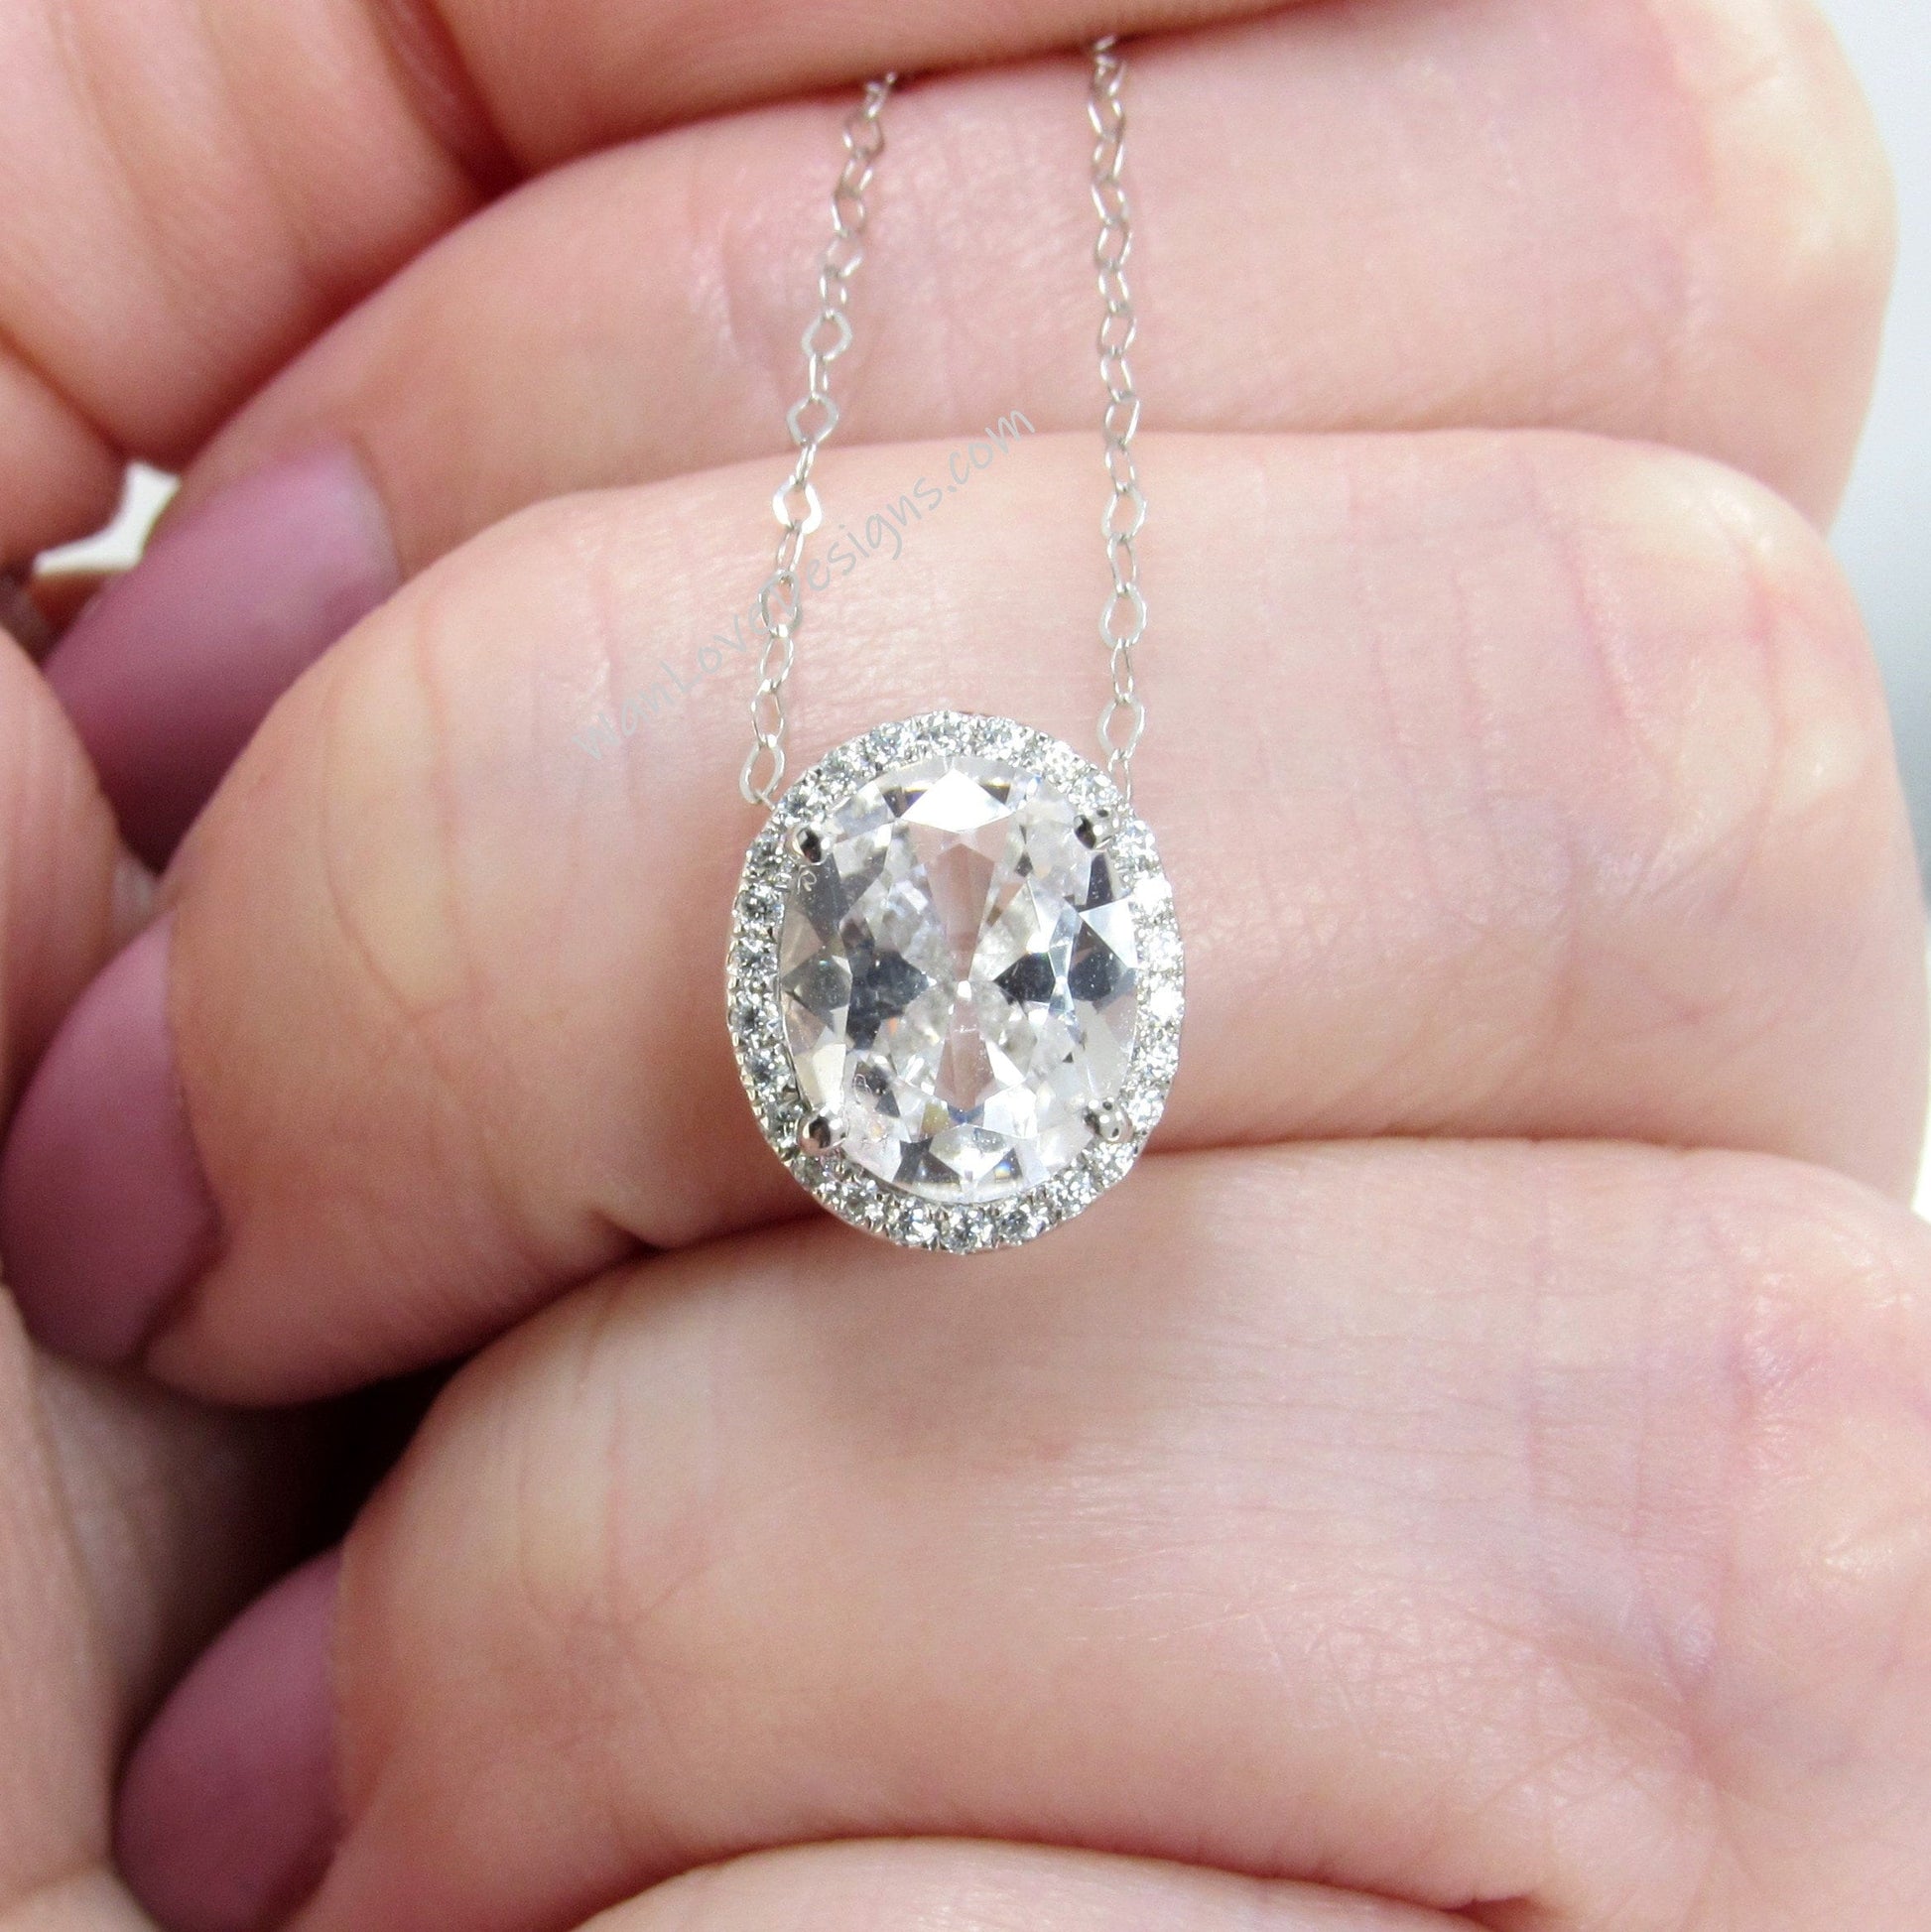 White Sapphire East West necklace 4ct Vertical Oval Halo Pendant Necklace white gold oval halo Charm chain Anniversary wedding gift for her